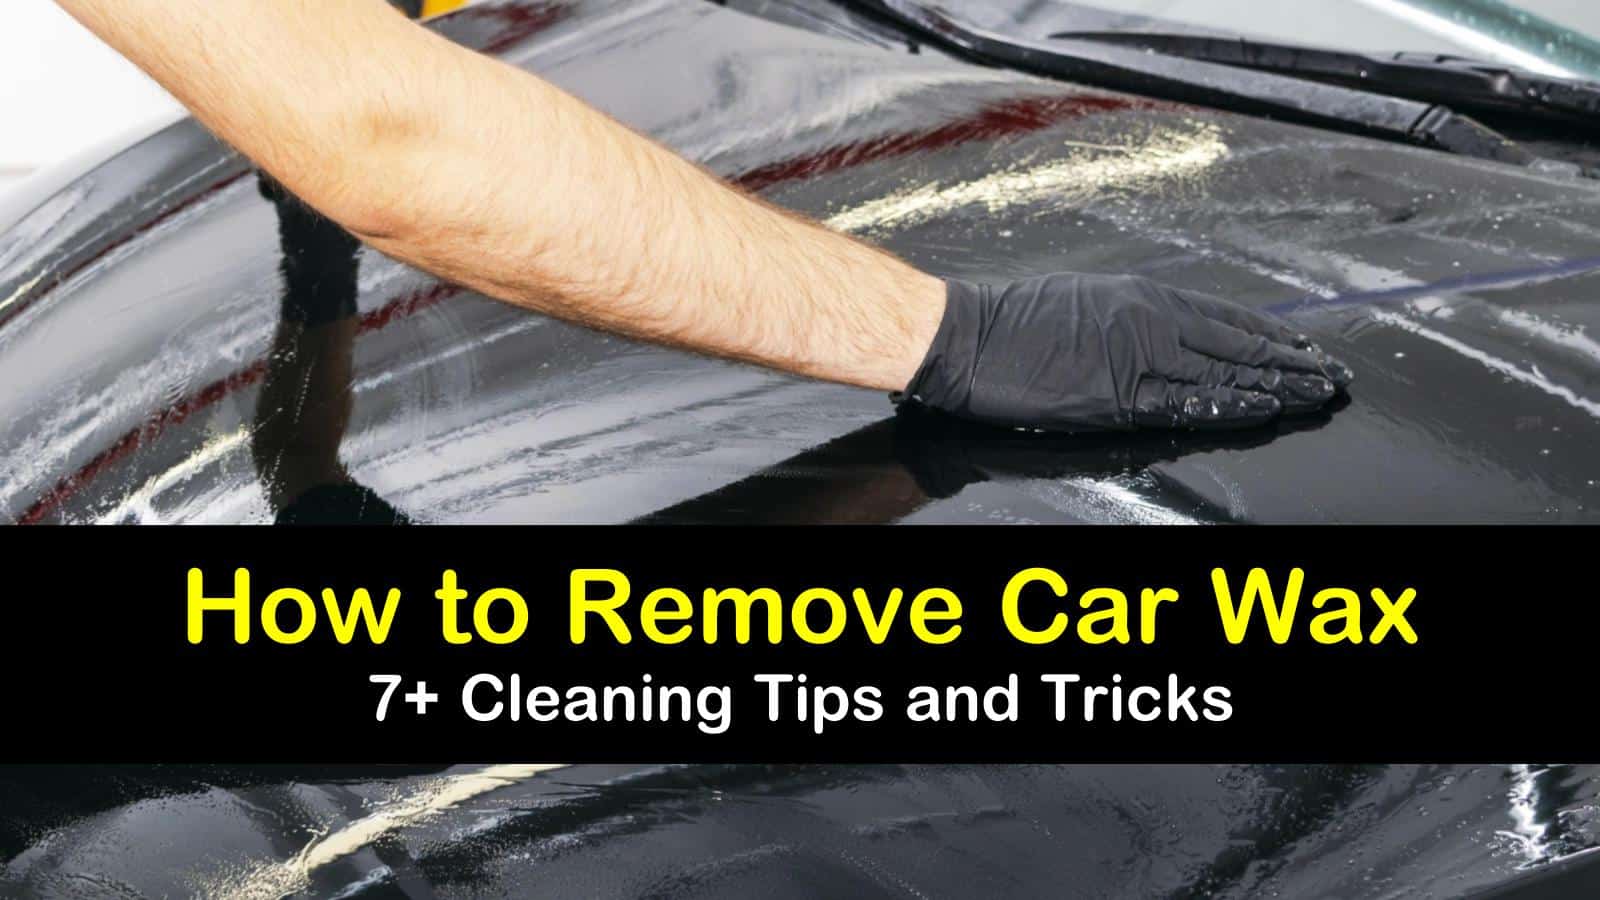 how to remove car wax titleimg1